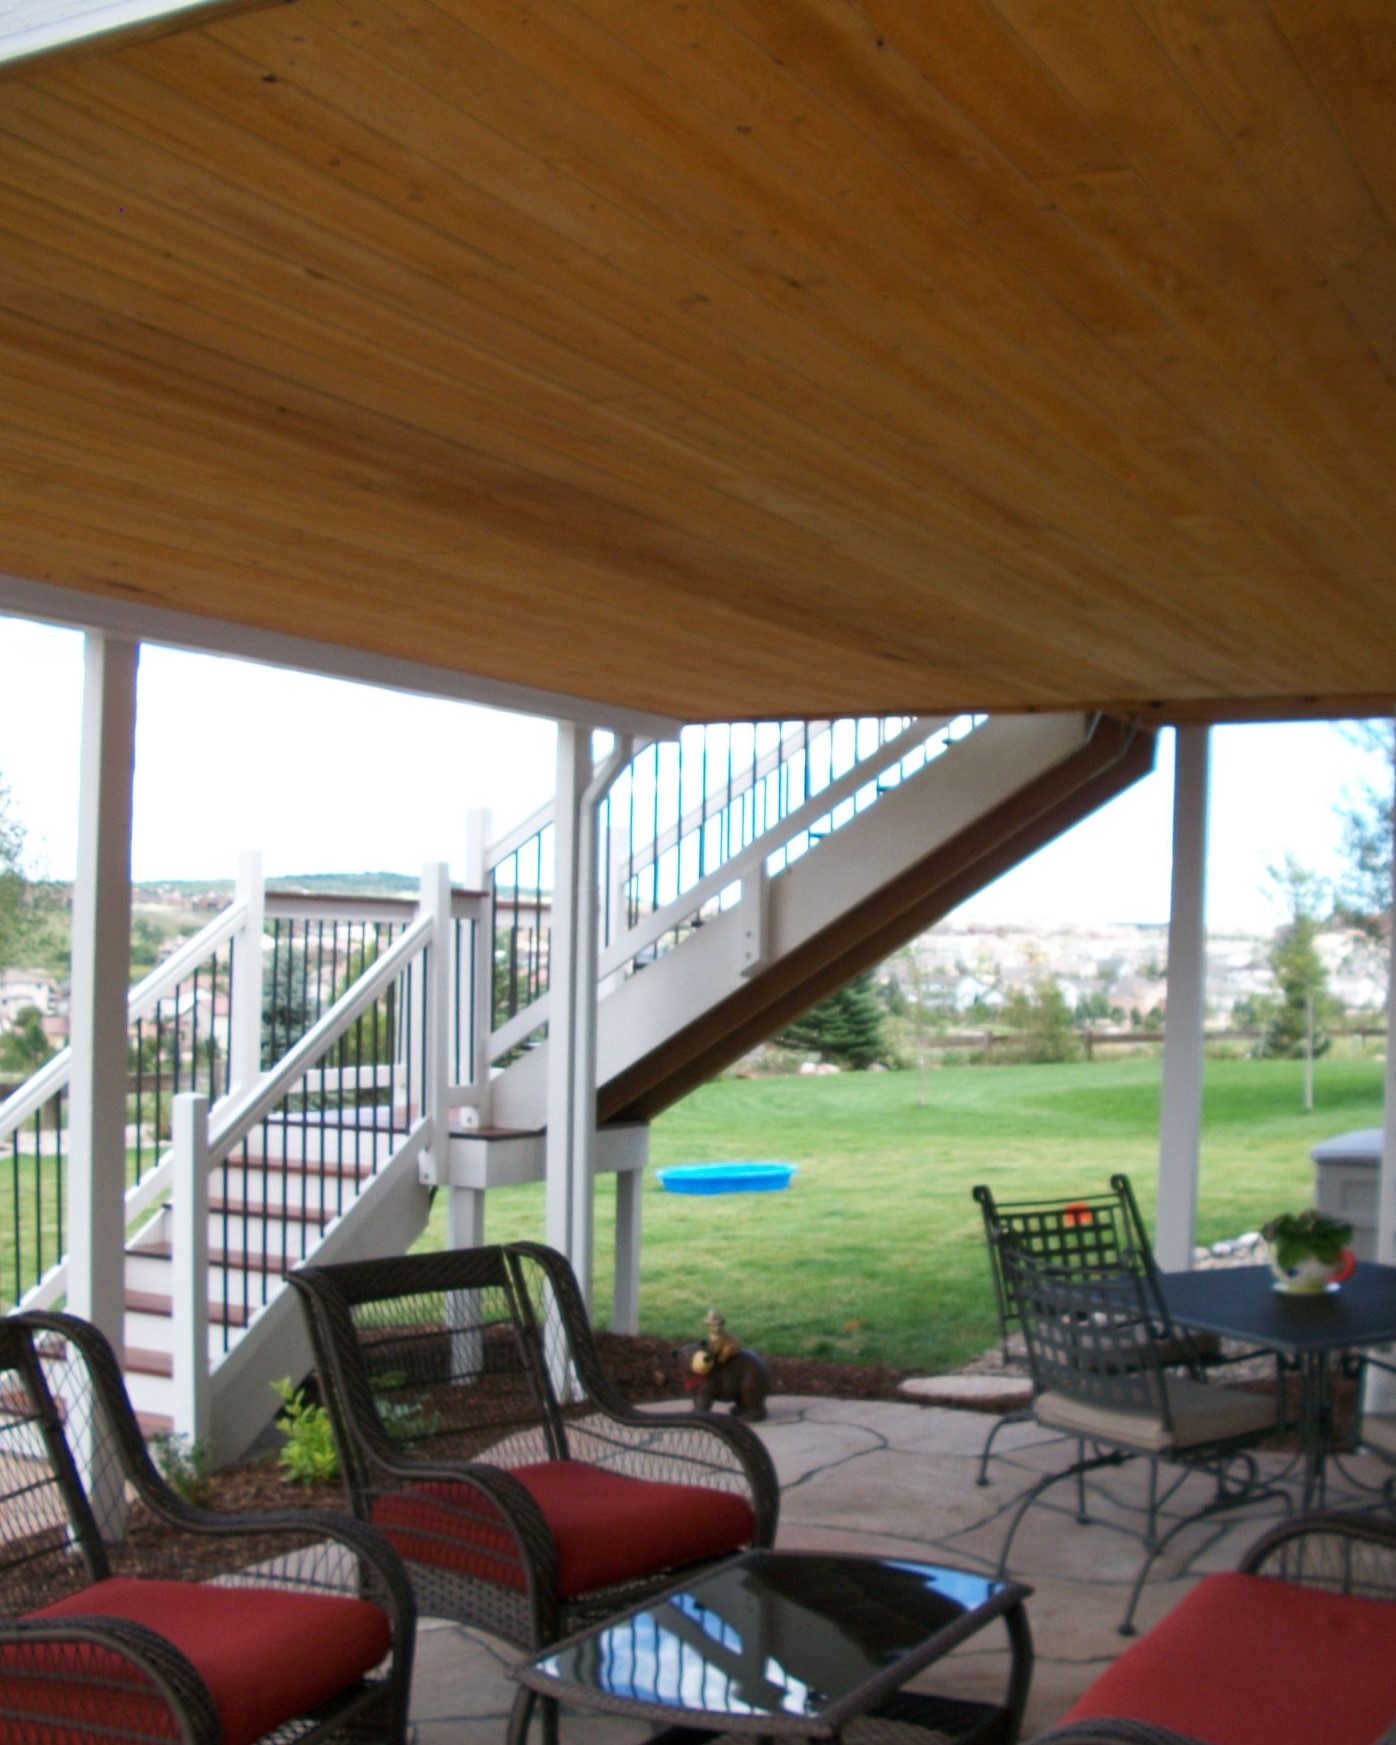 Hardwood deck built with an dry space below, creating a comfortable outdoor living space.